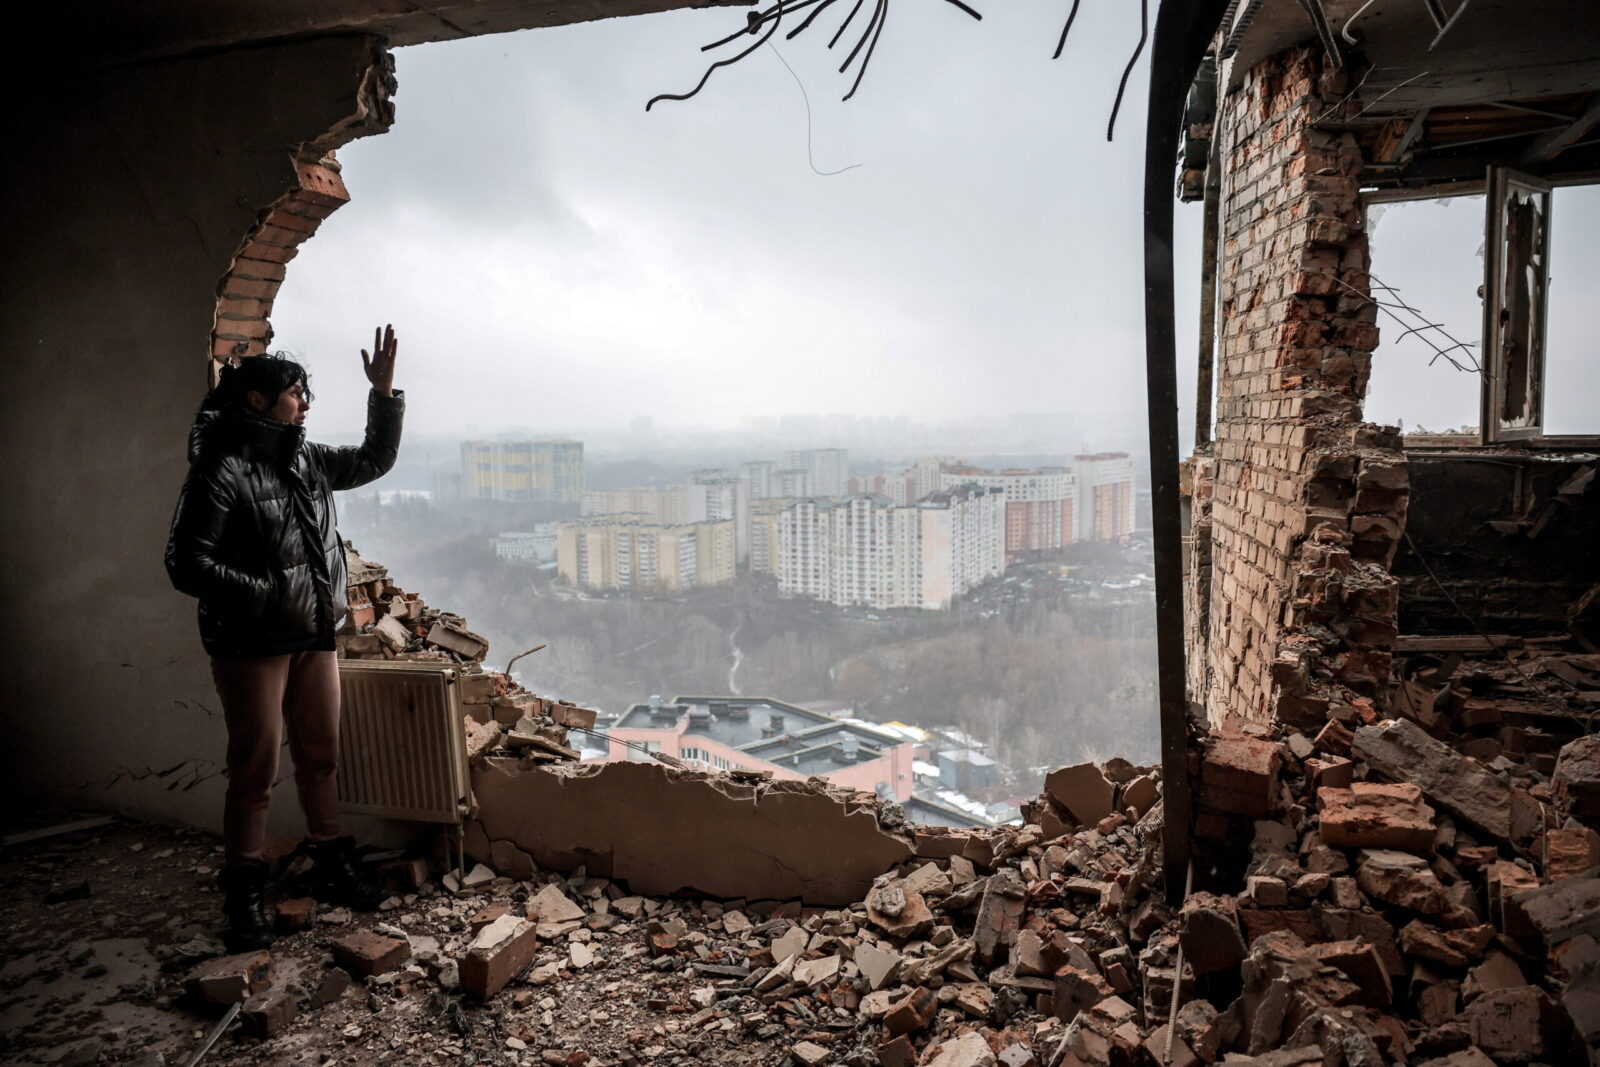 epa11040621 Local resident Tetiana (40) inspects her ruined flat at the site of a drone attack on a residential building in Kyiv (Kiev), Ukraine, 22 December 2023, amid the Russian invasion. At least two people were injured after a Russian drone attack hit a residential building in the Solomianskyi district of Kyiv, the mayor of the city Vitali Klitschko wrote on telegram. For the third time in the last six days, Russia's 'Shahed' type drones attempted to hit infrastructure and residential buildings in the Ukrainian capital, the Kyiv City Military Administration said. Russian troops entered Ukrainian territory on 24 February 2022, starting a conflict that has provoked destruction and a humanitarian crisis.  EPA/Oleg Petrasyuk